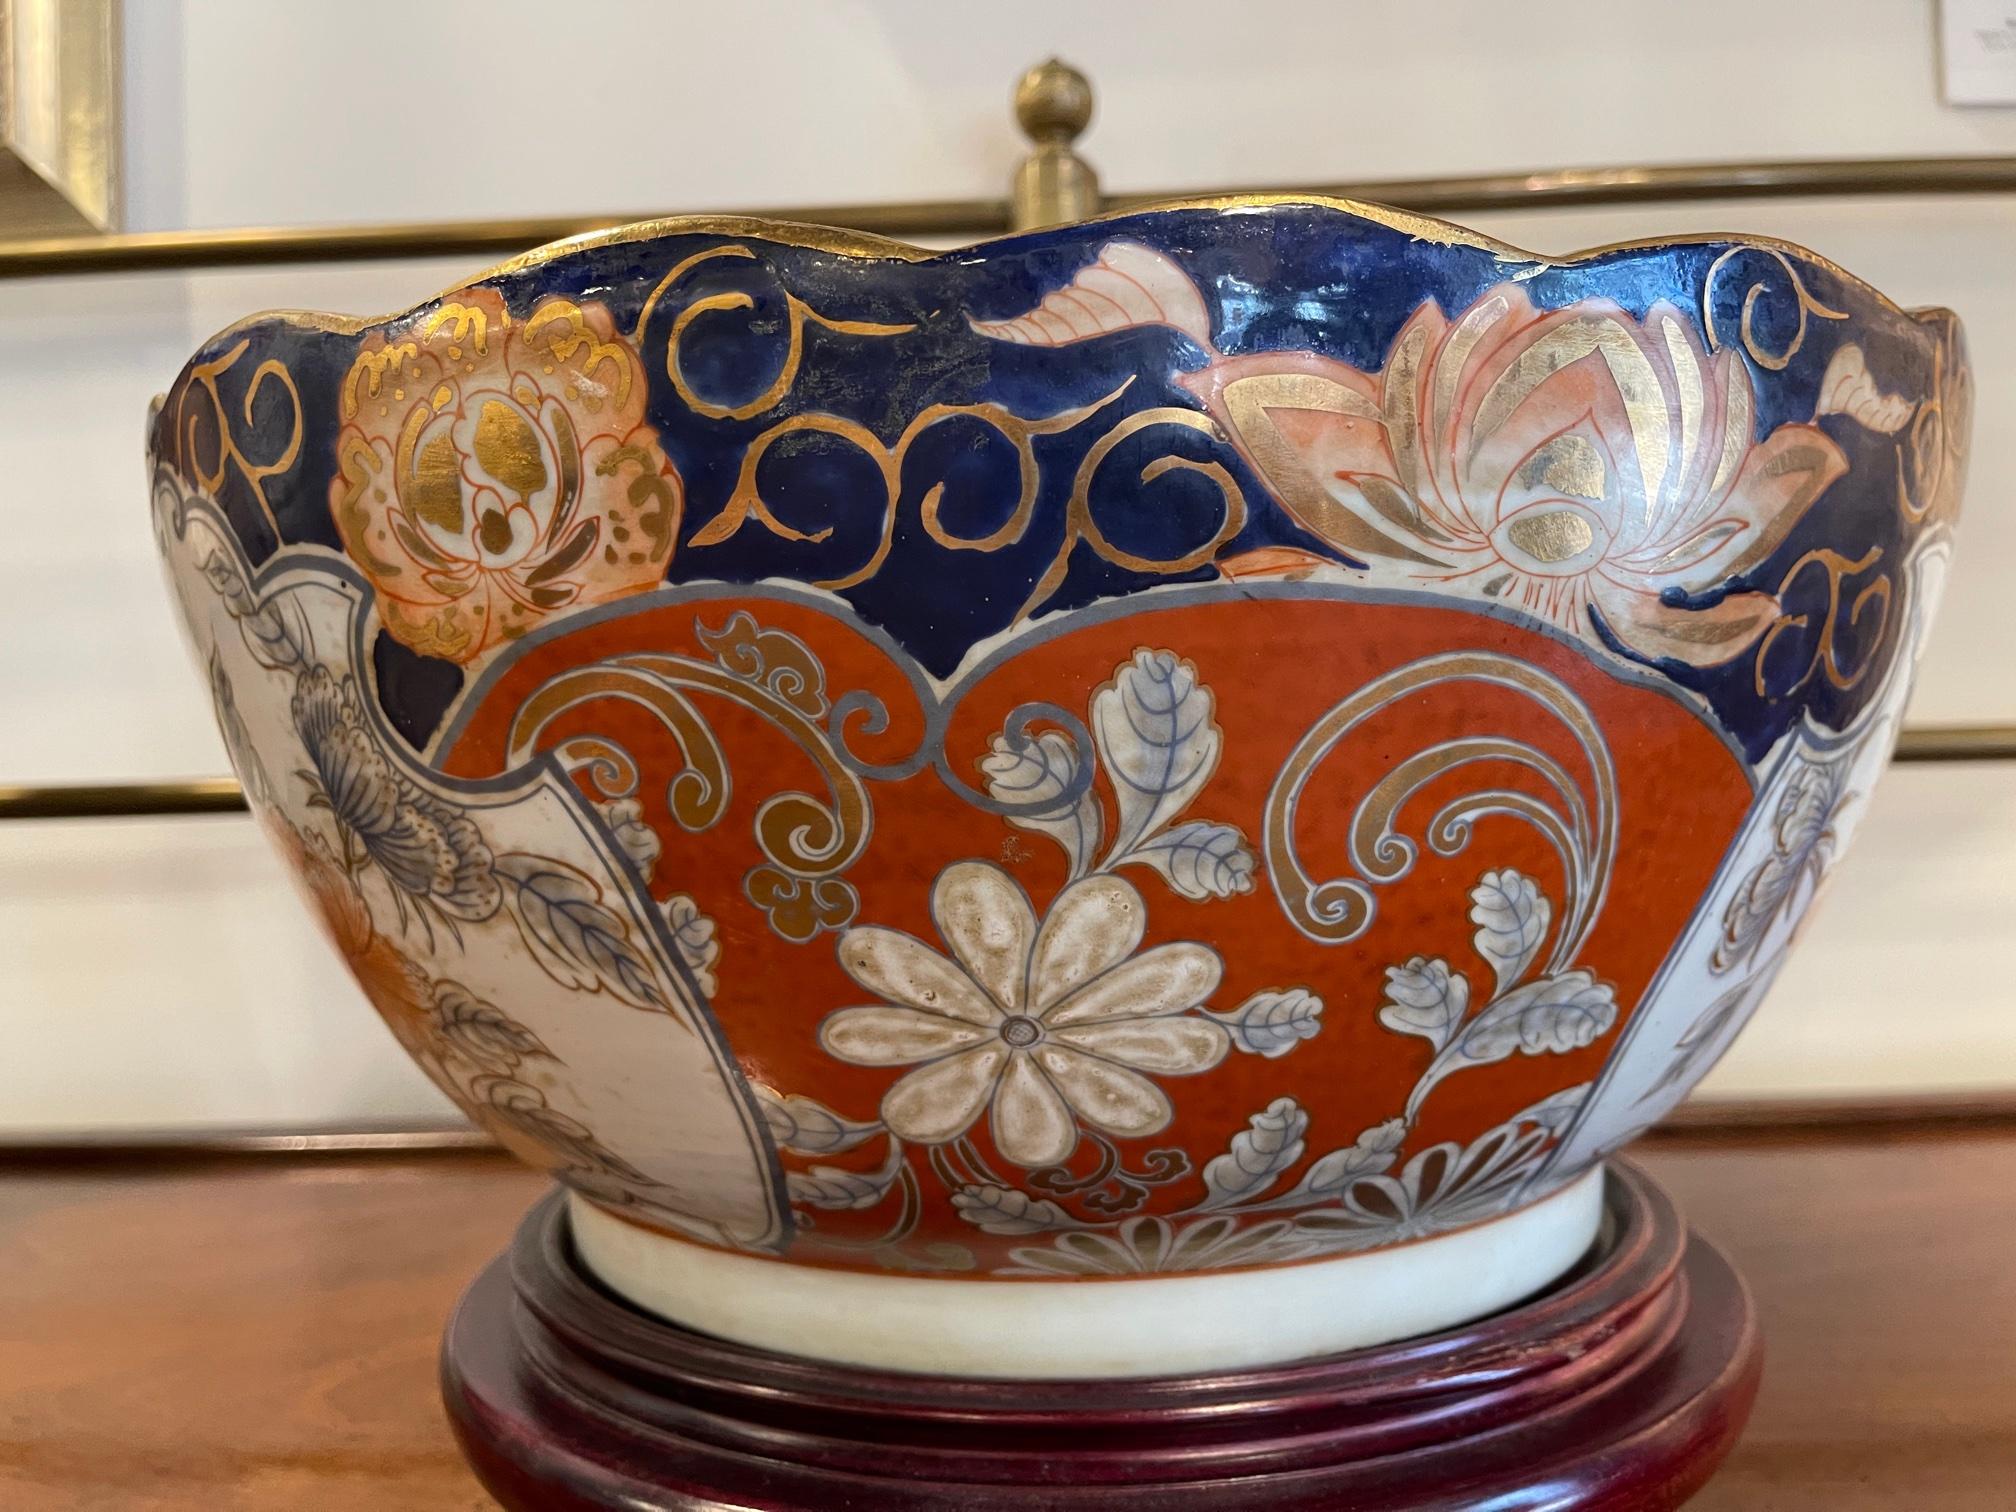 Porcelain Imari Style Center or Punch Bowl on Wood Stand, 20th Century